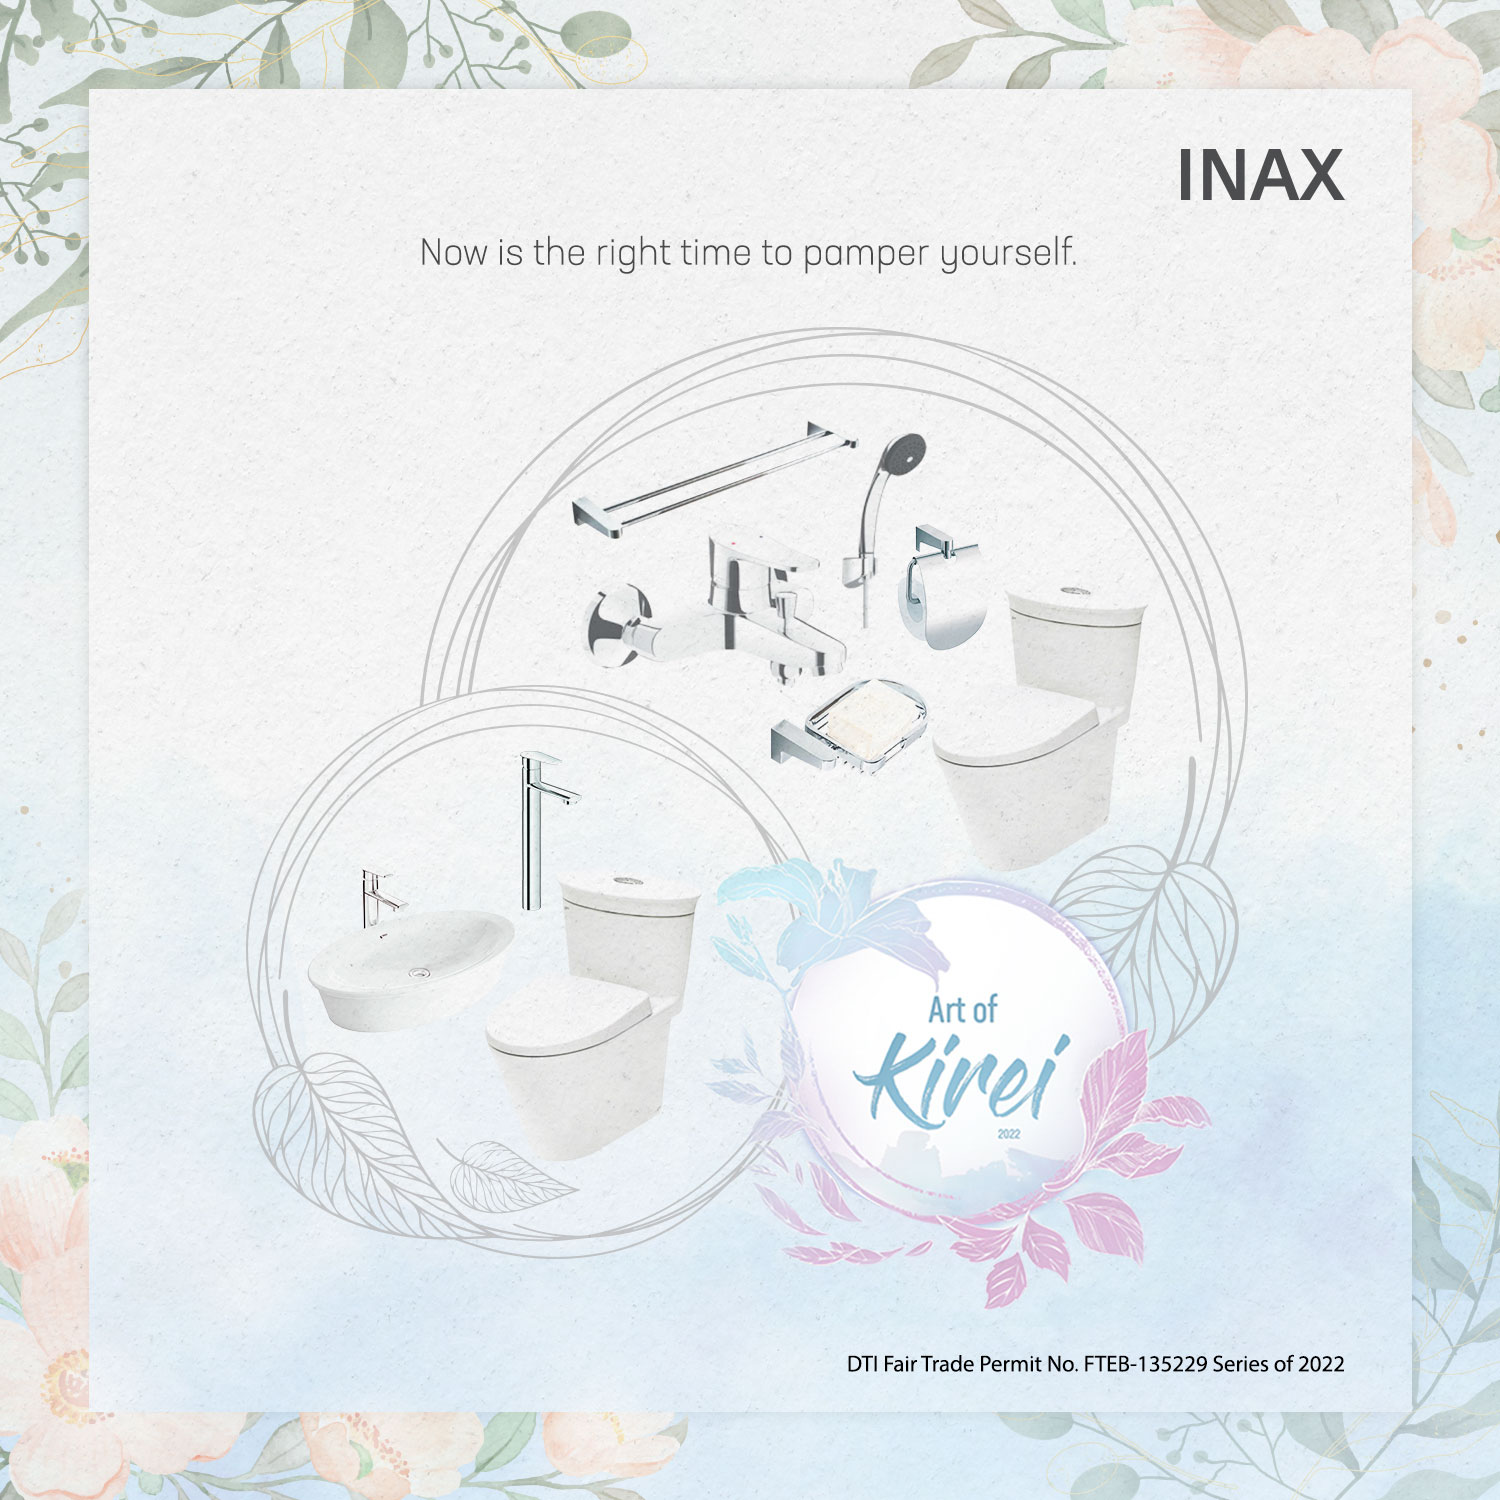 INAX - Exude beauty and calm in the bathroom with 25% off on INAX bundles and packages